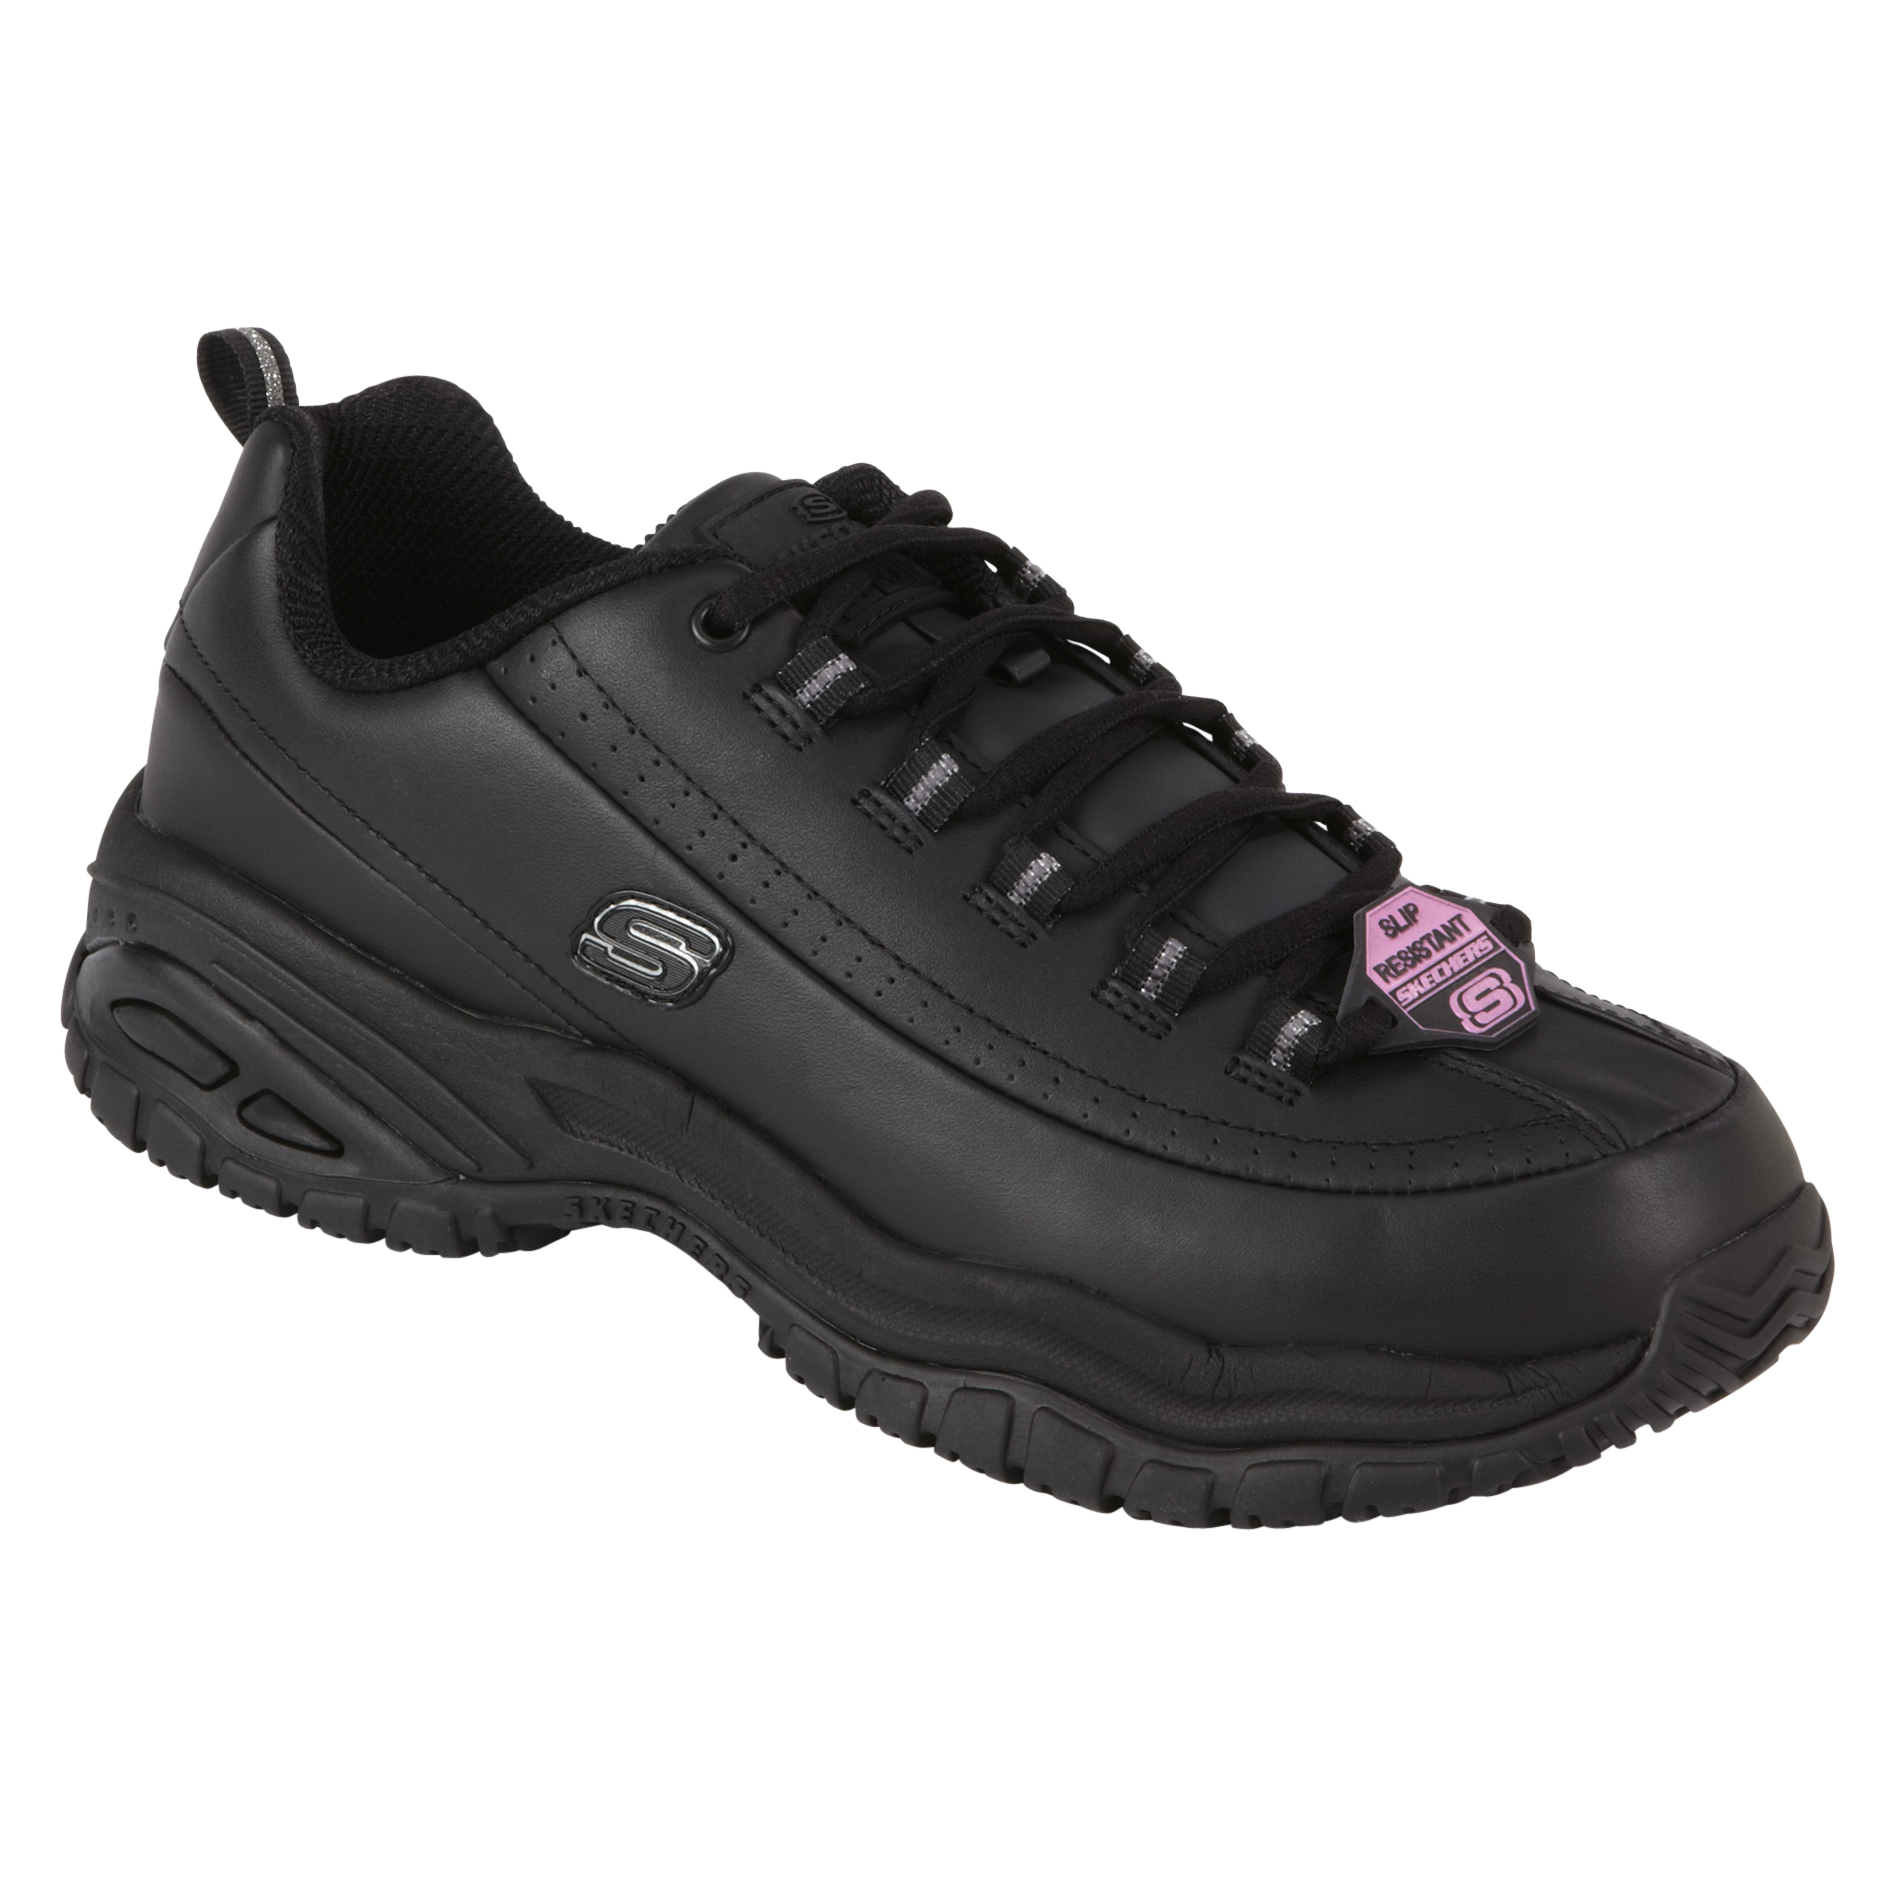 skechers oxford shoes